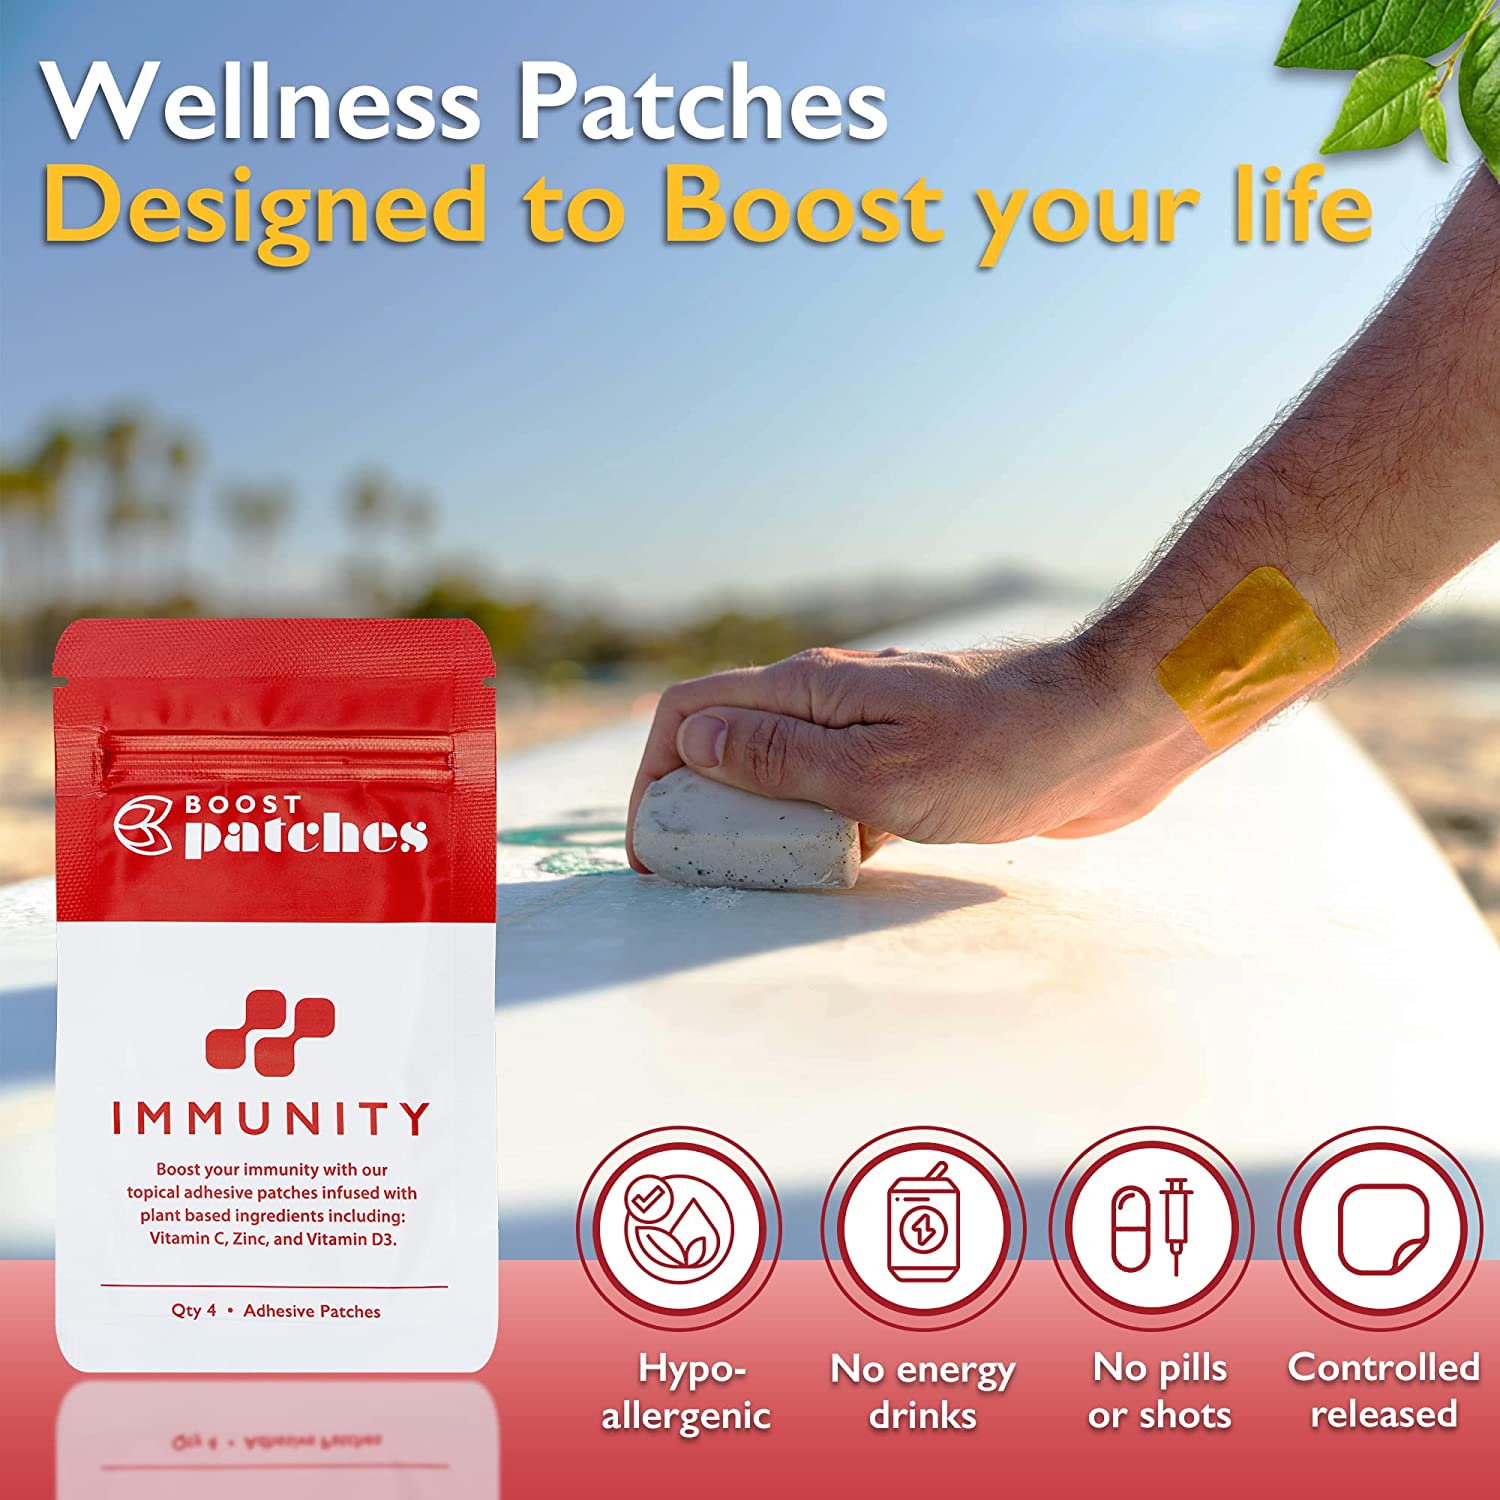 Immune Patches, Boost Your Immunity